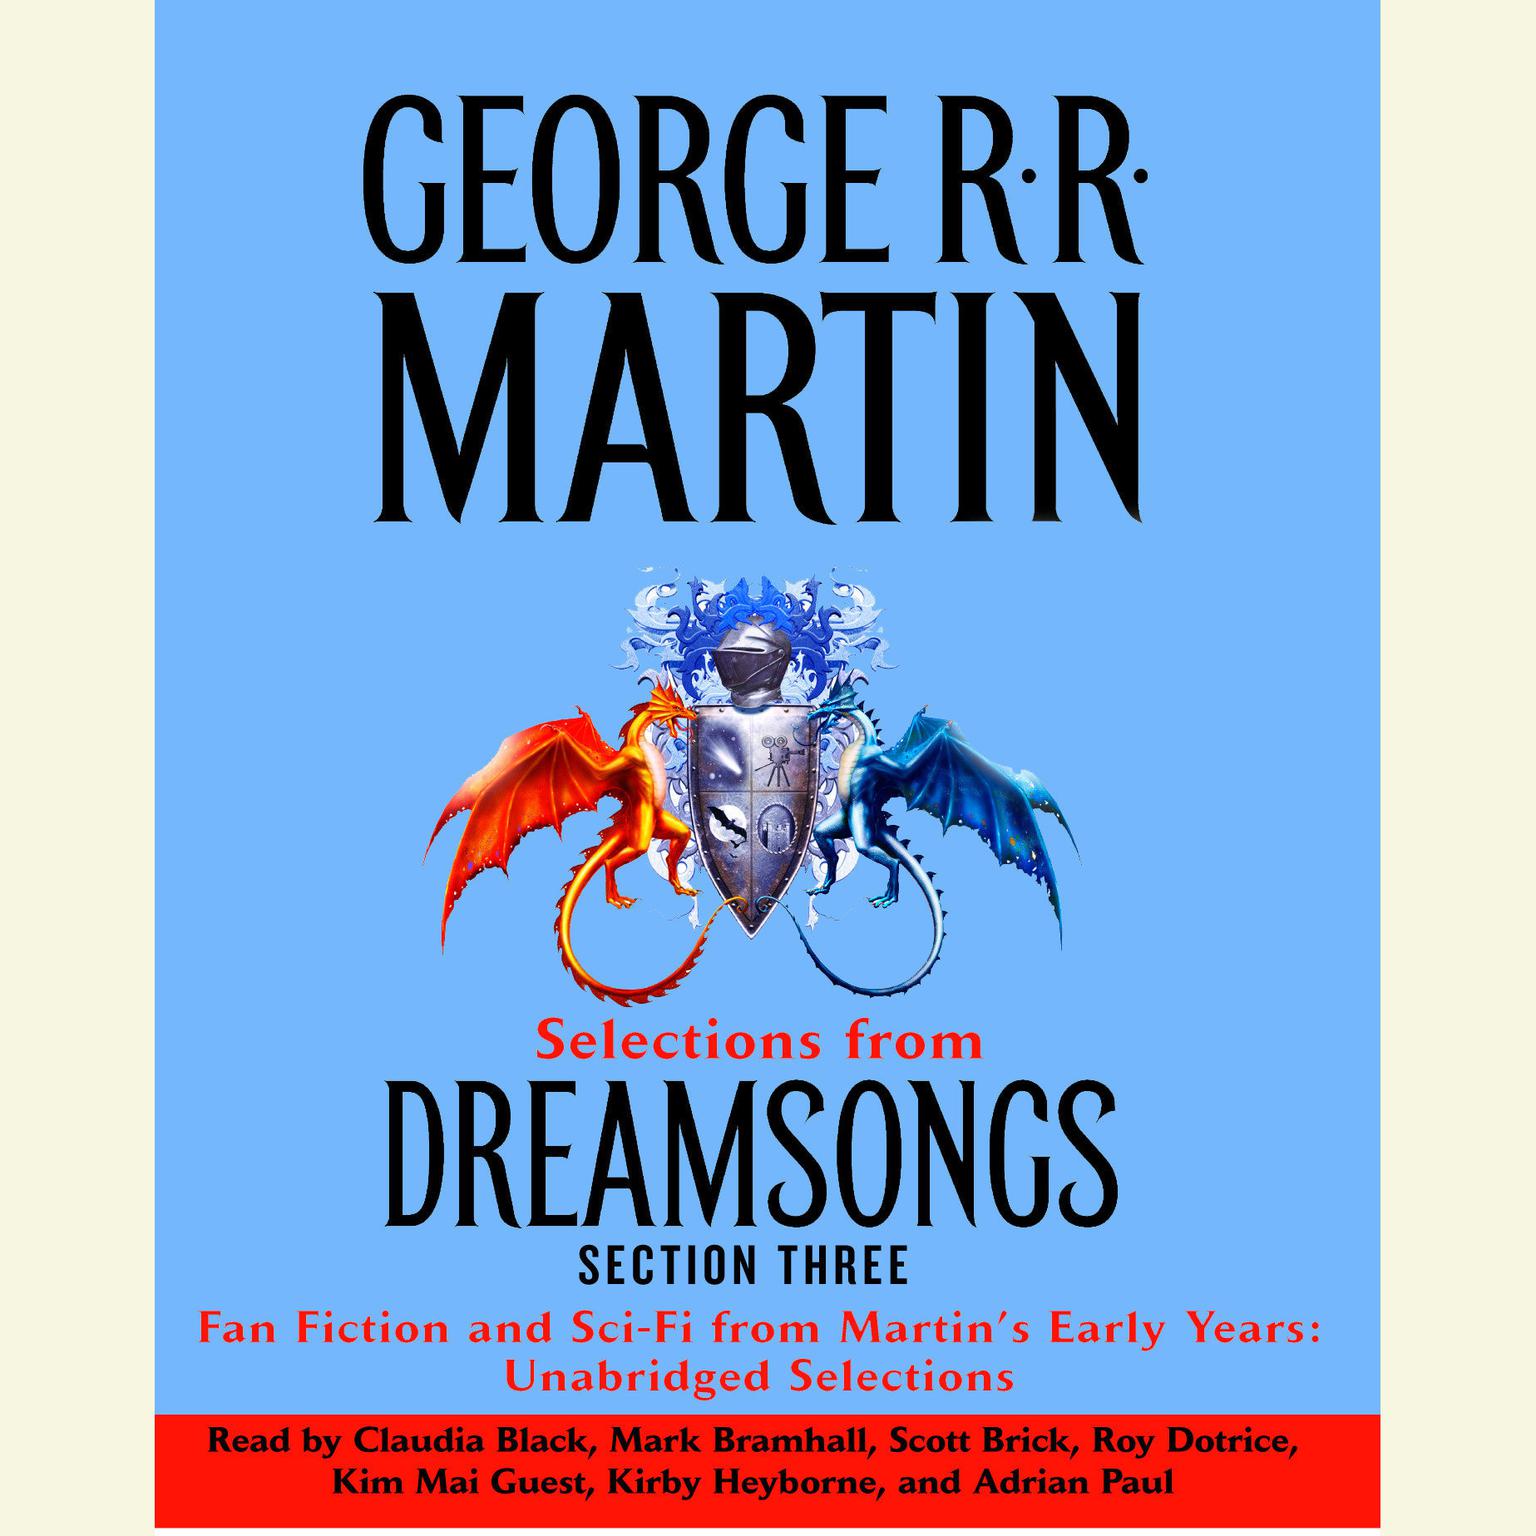 Dreamsongs Section 3: The Light of Distant Stars: The Light of Distant Stars Audiobook, by George R. R. Martin